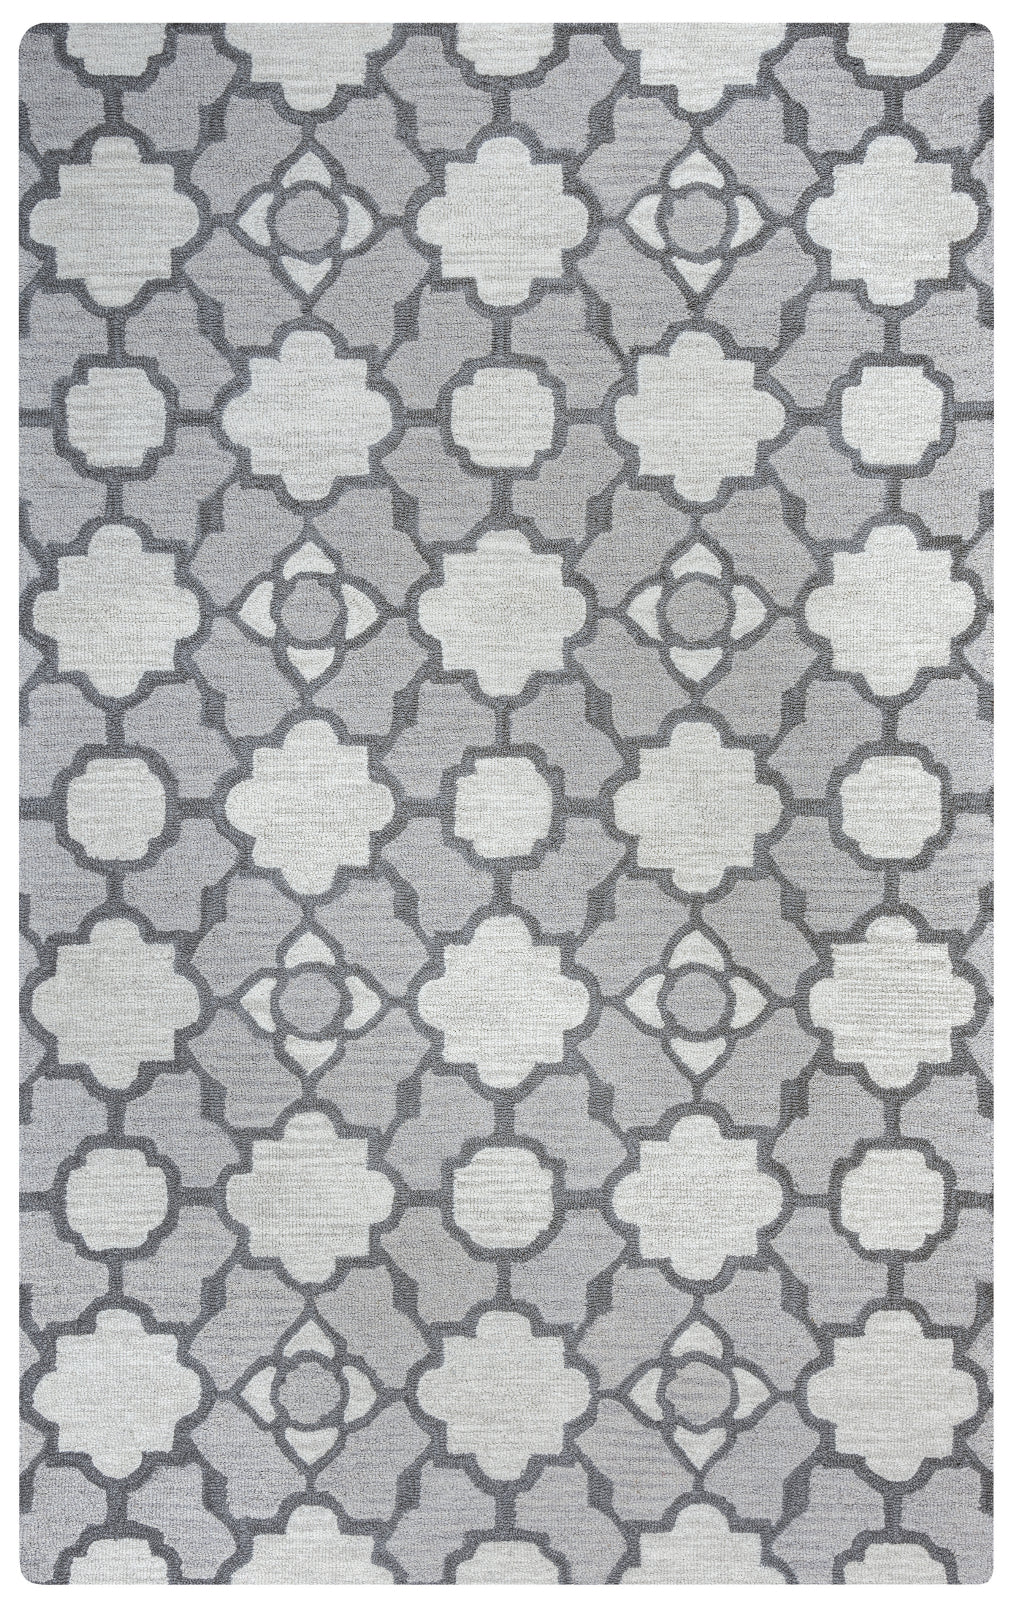 Rizzy Maggie Belle MB9481 Light Grey Area Rug main image